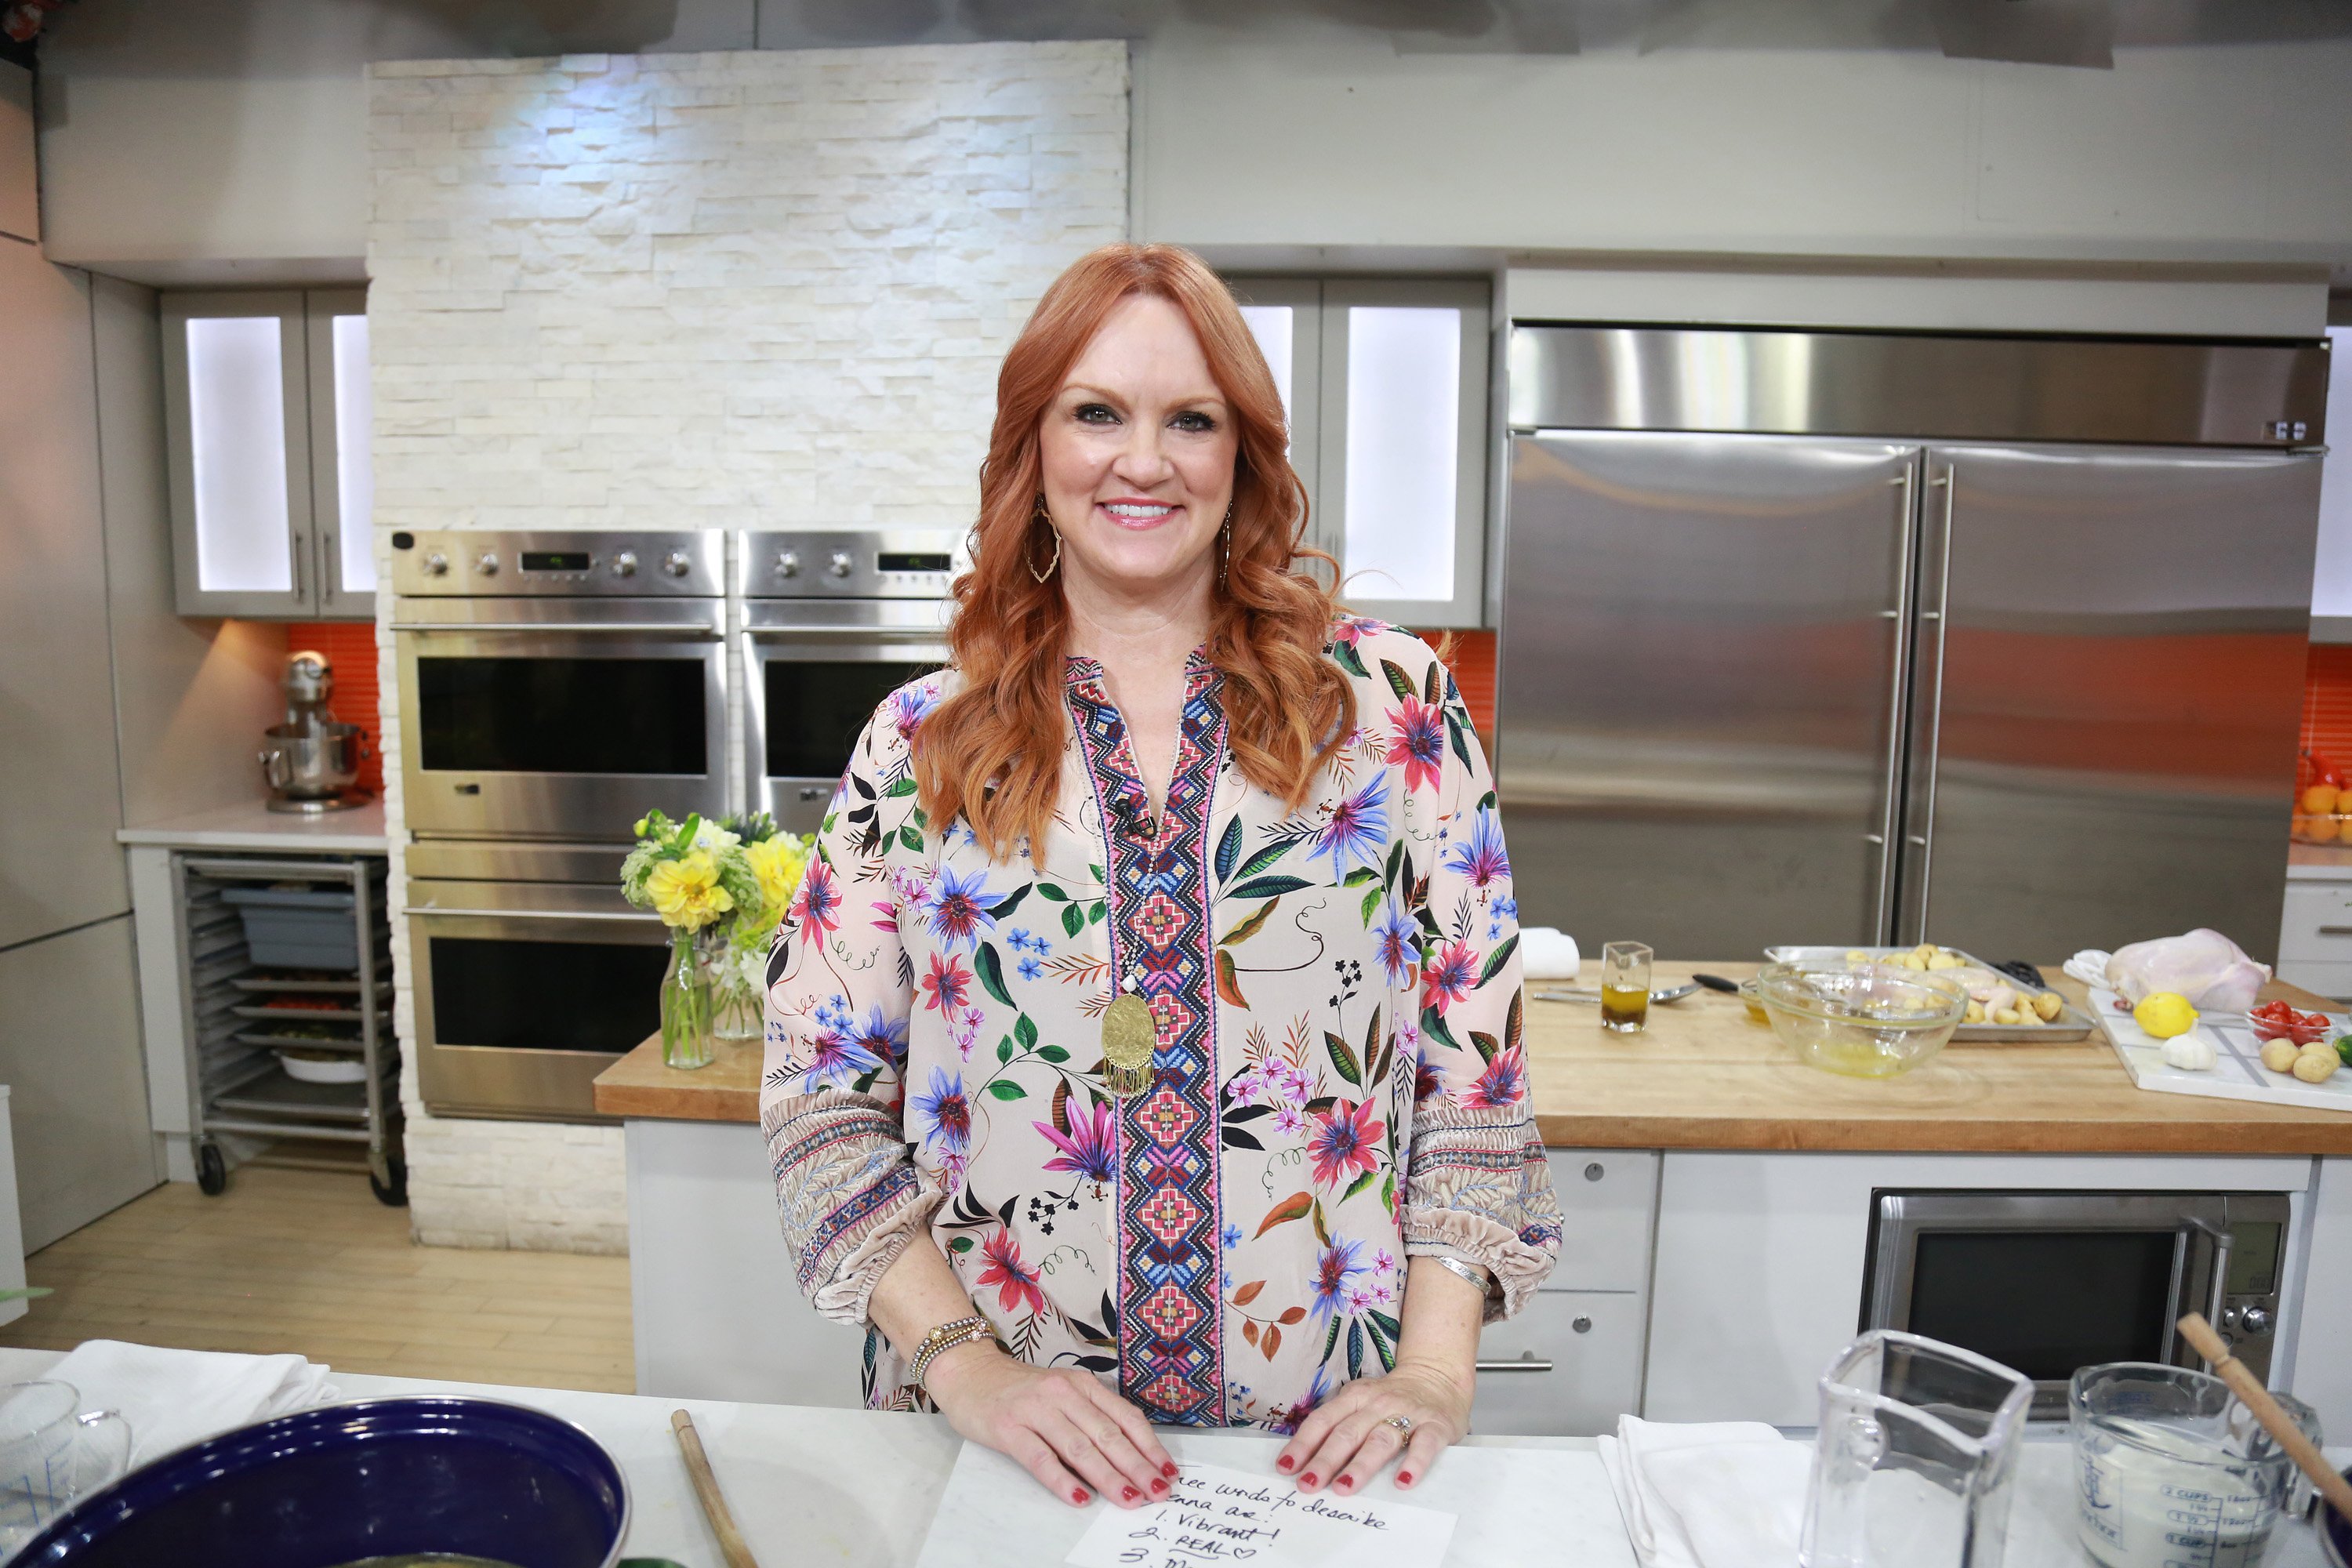 'The Pioneer Woman' star Ree Drummond in a 2019 appearance on 'Today.'